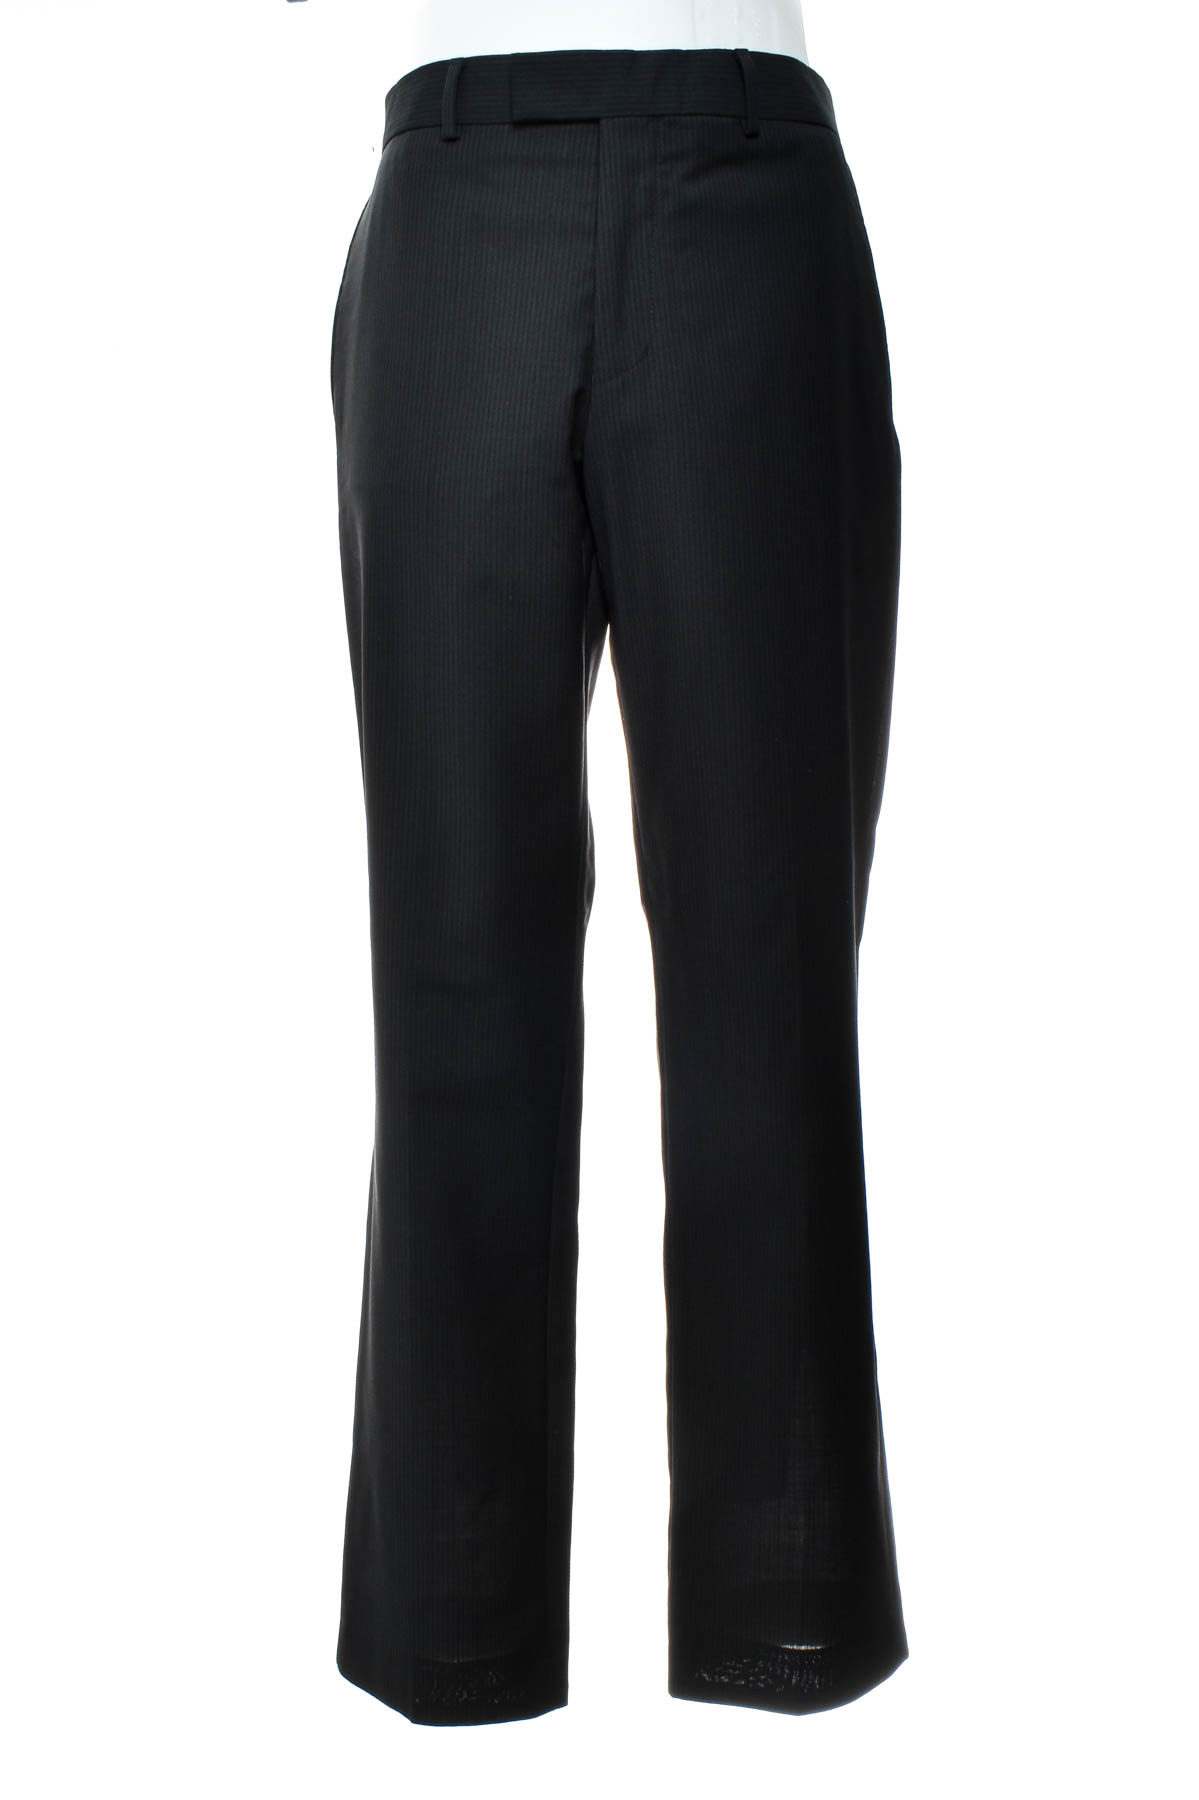 Men's trousers - SELECTION by S.Oliver - 0